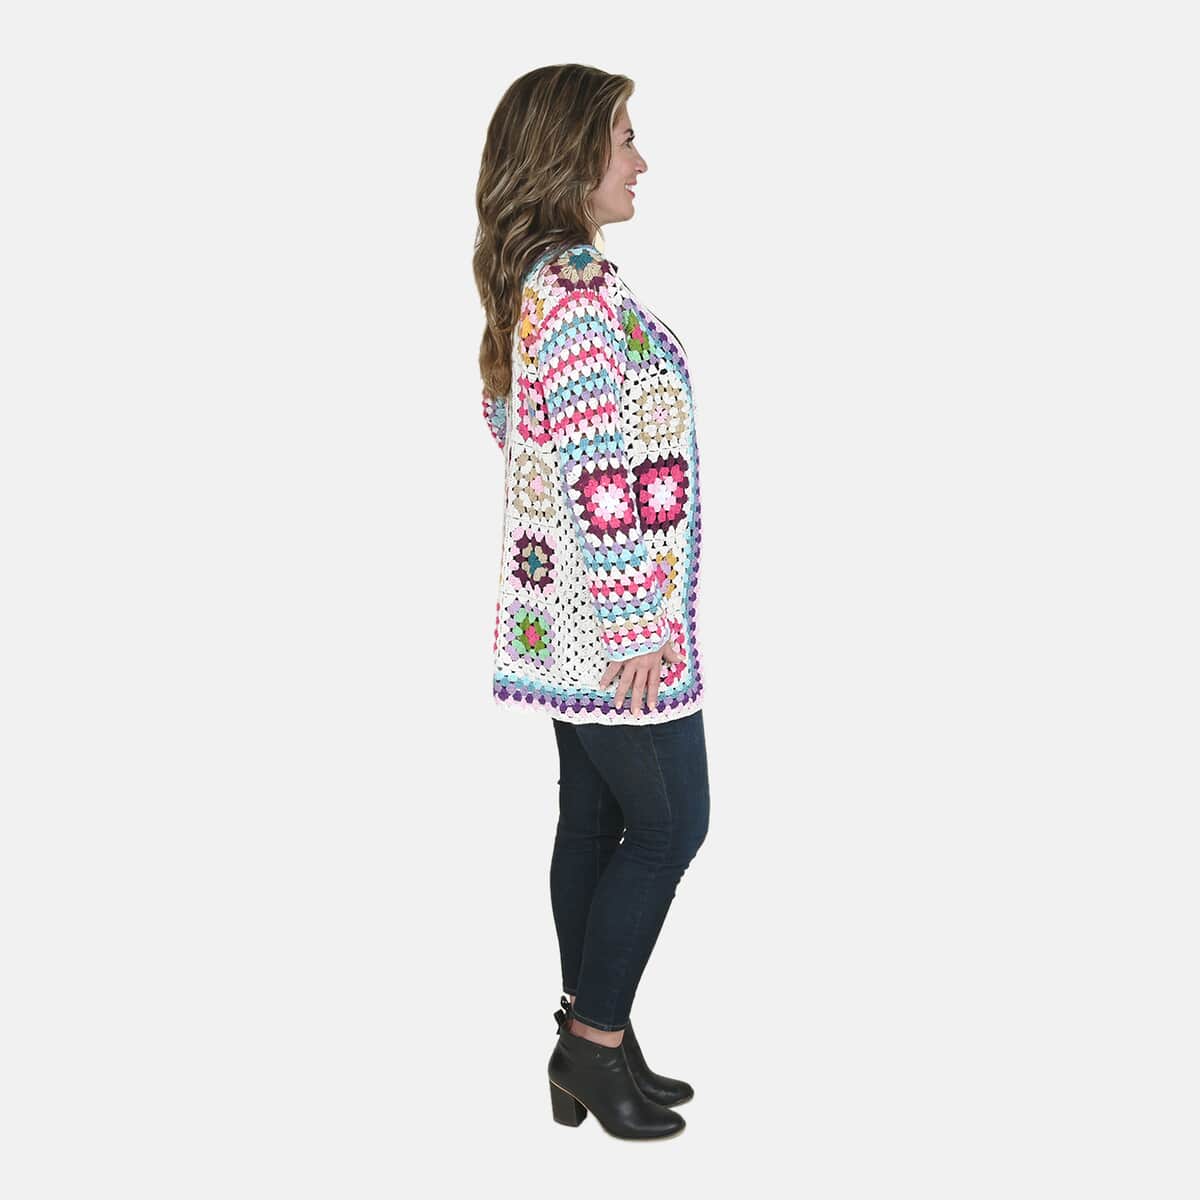 PASSAGE 100% Cotton Crochet White and Multi Color Square Cardigan for Women, Bohemian Sweater, Open Front- (S) image number 2